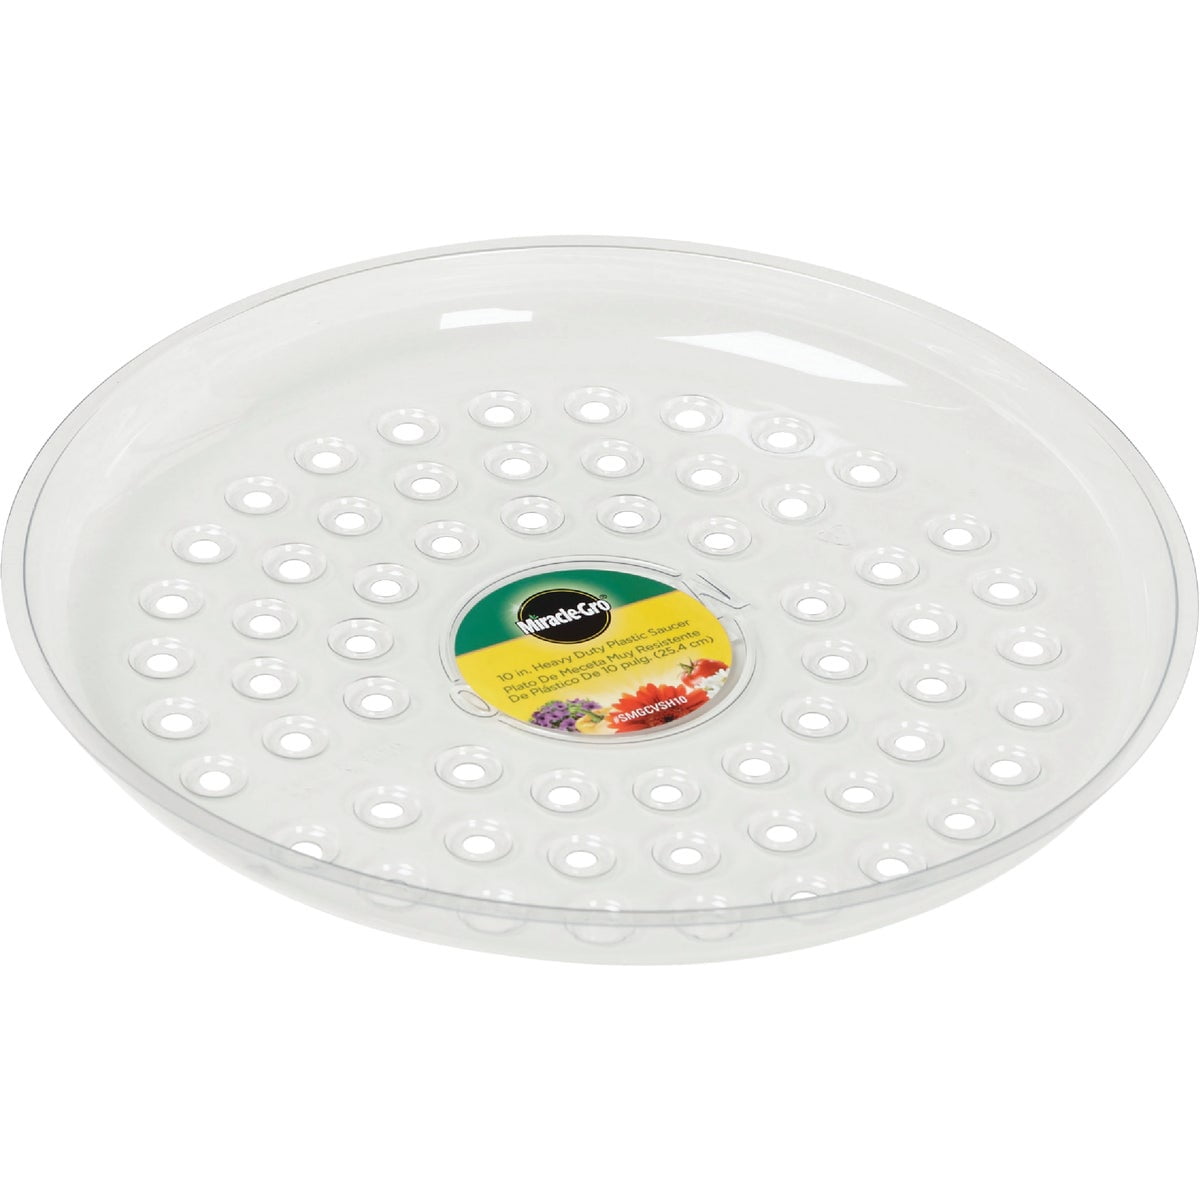 10 Inch Set Of 5 Talluk Clear Plastic Plant Saucers For Gar Durable Drip Tray 